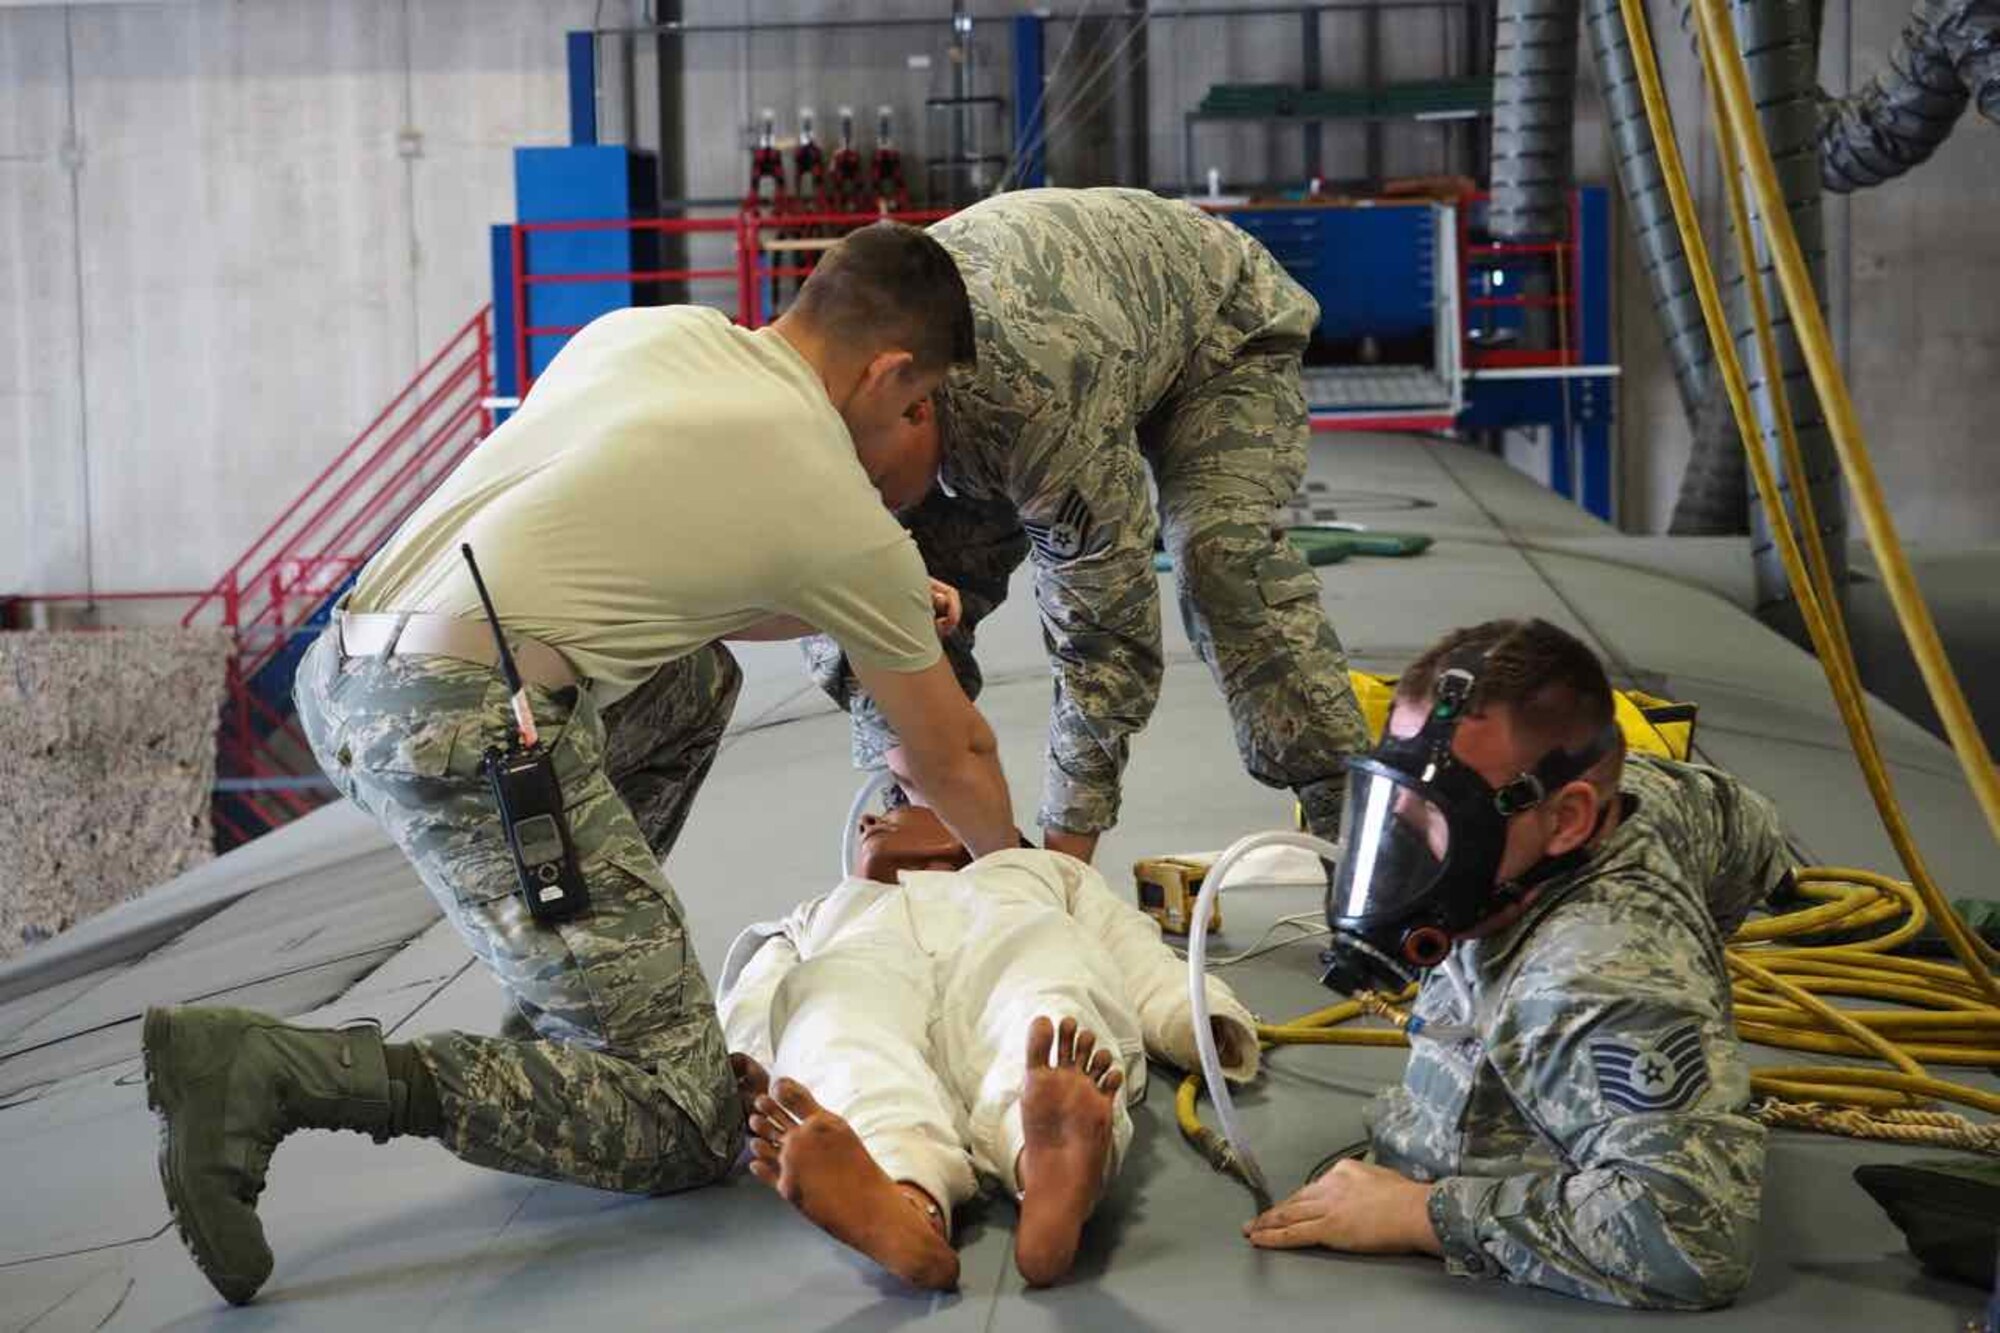 934th Maintenance Squadron members extract a simulated incapacitated person from a C-130 fuel cell.